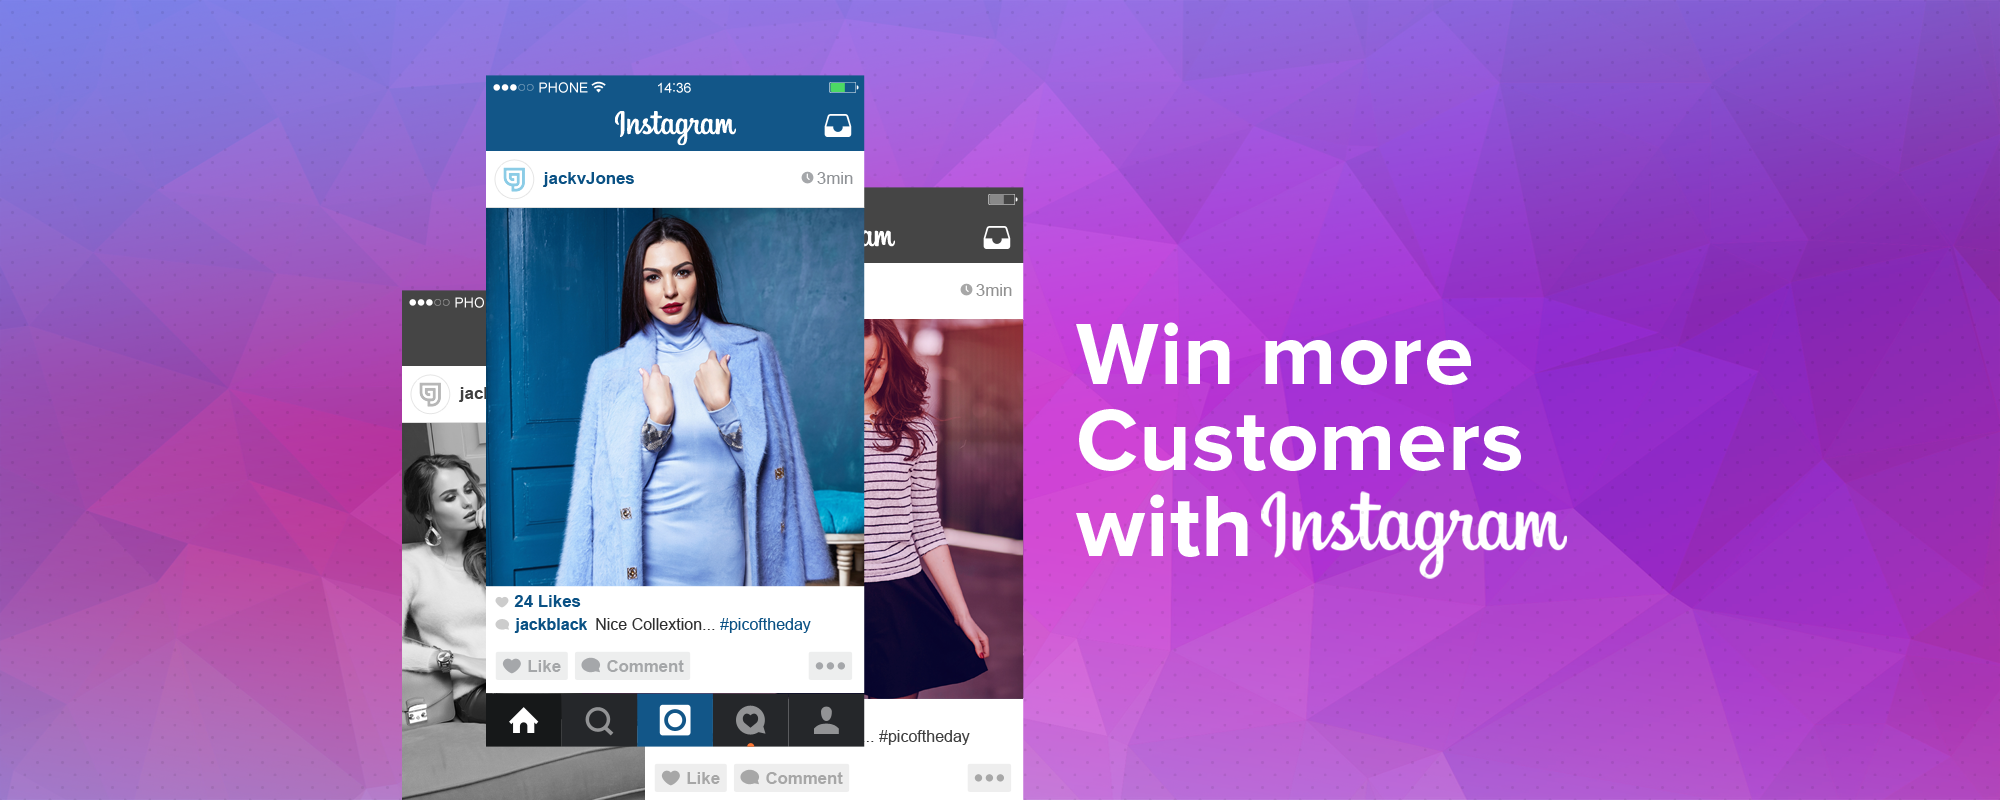 MARKET YOUR SMALL BUSINESS ON INSTAGRAM TO GET MORE CUSTOMERS